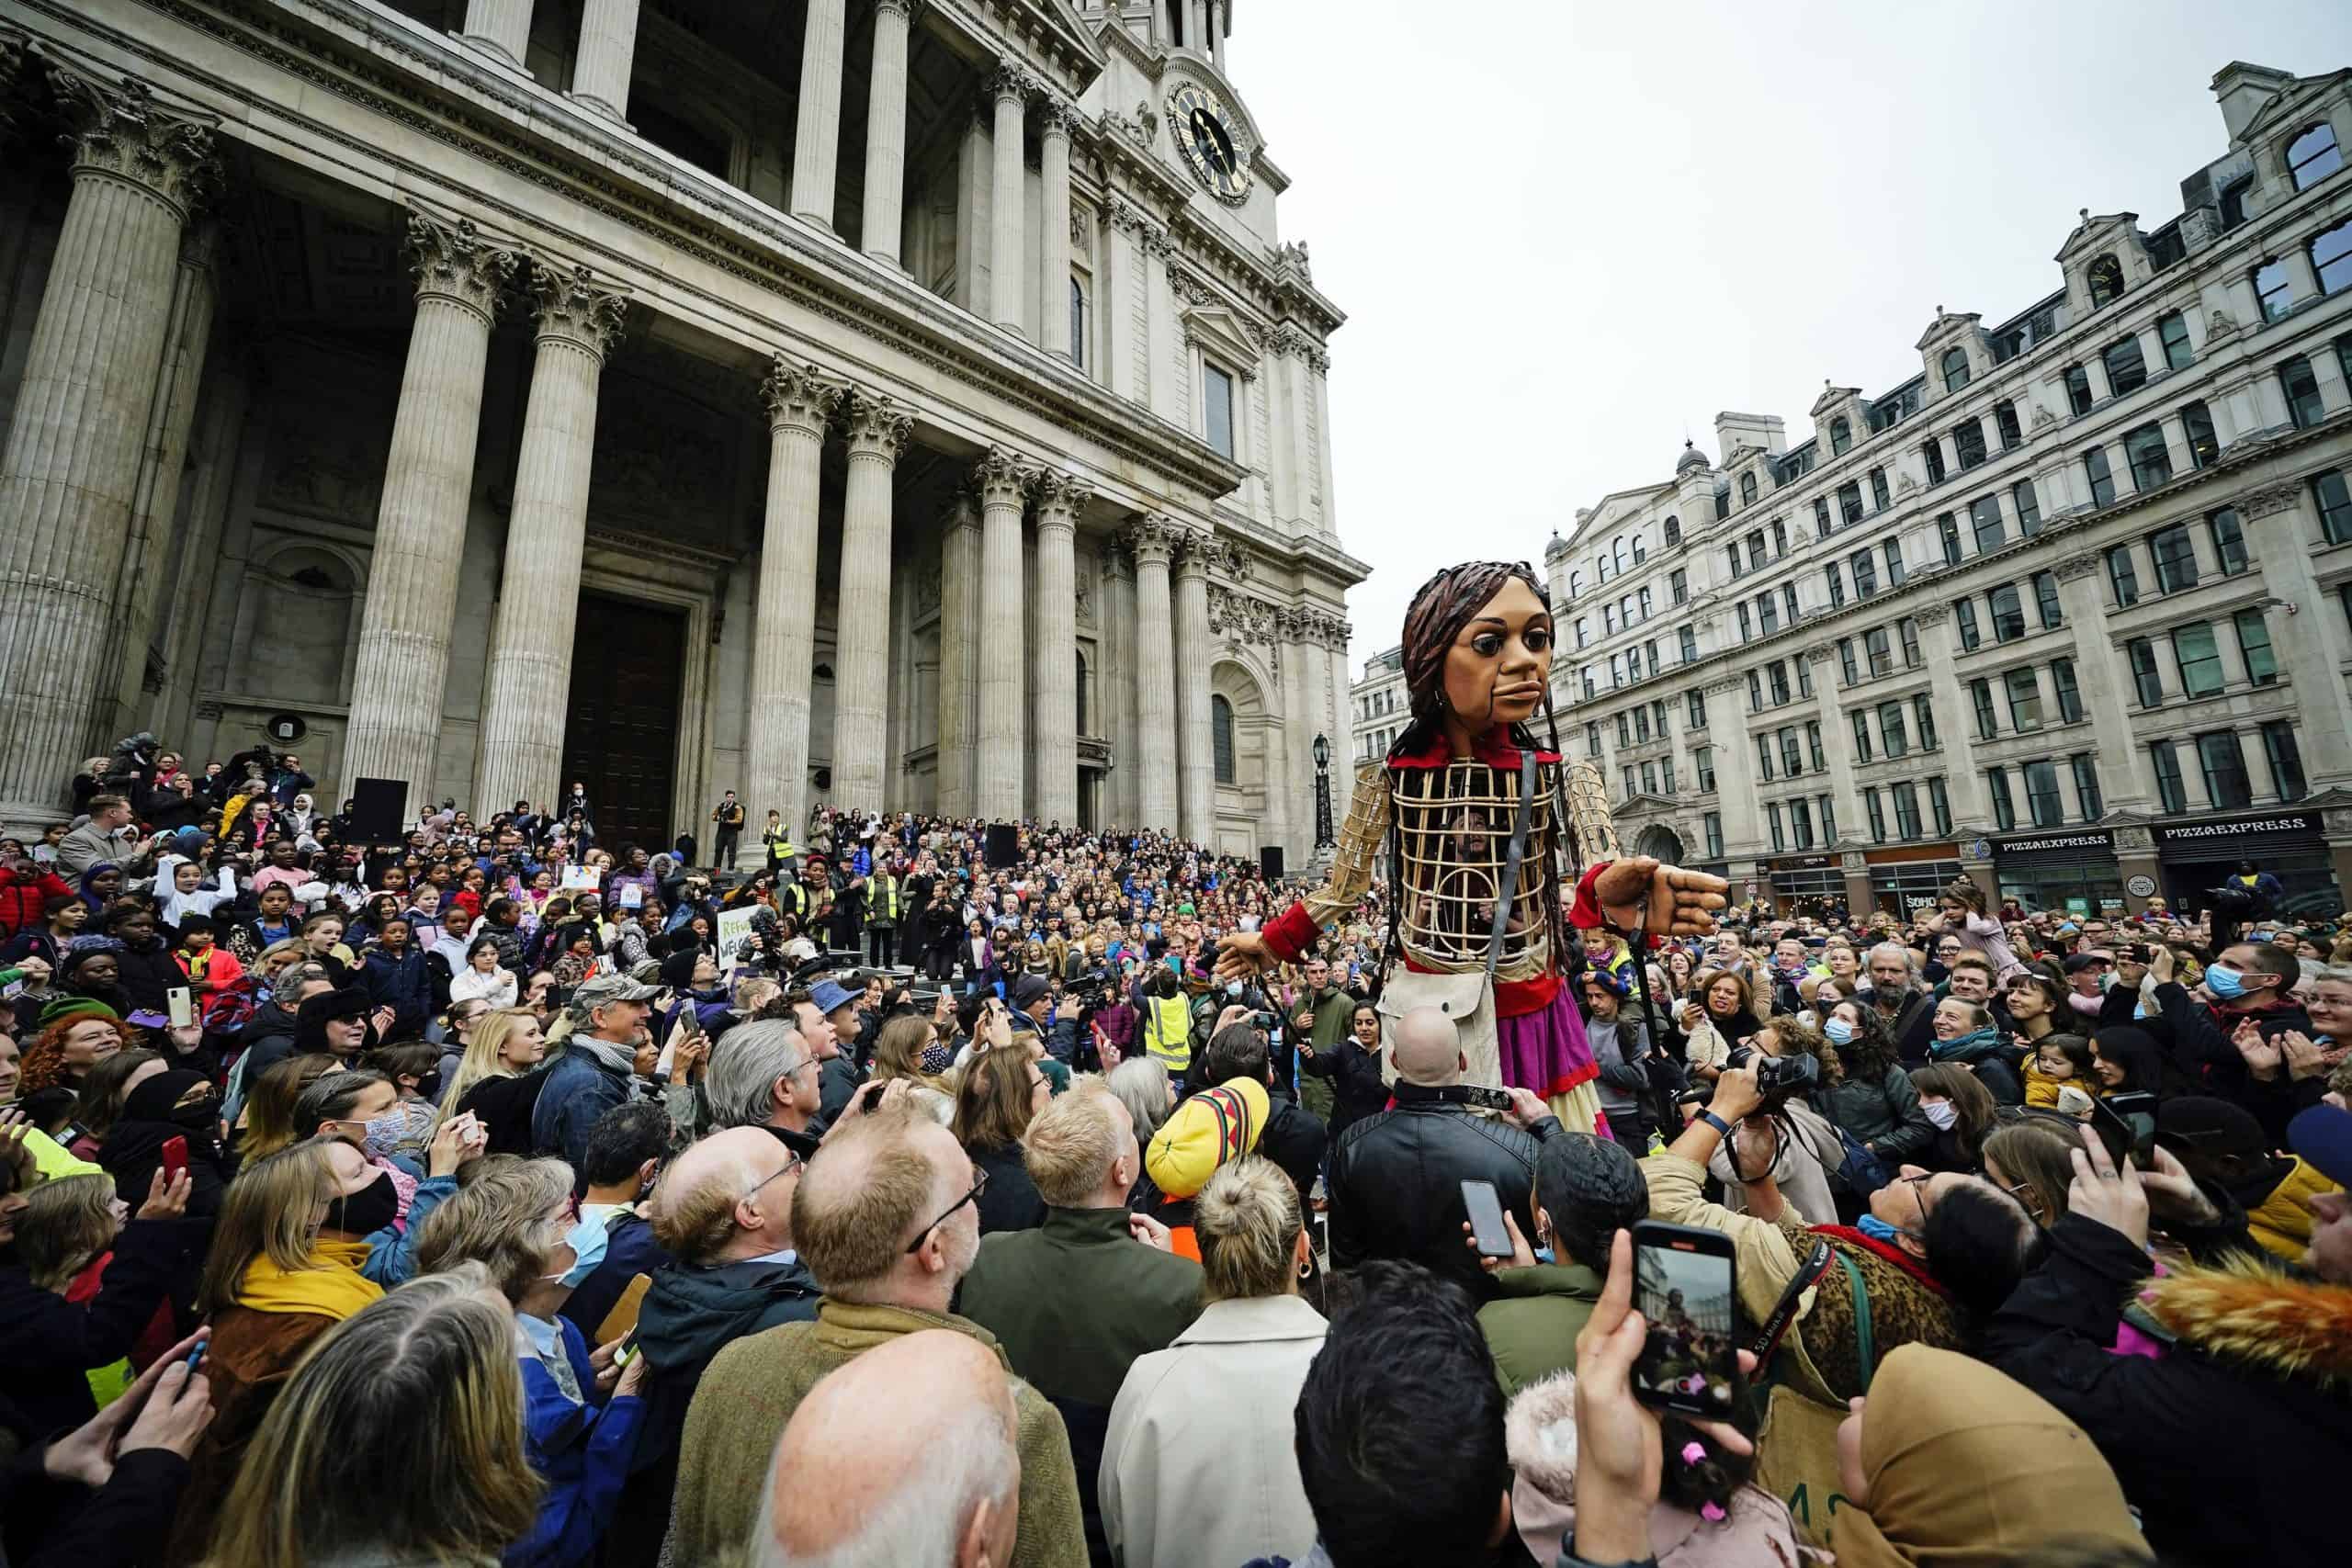 St Paul’s dean welcomes Syrian refugee puppet – saying London can be a ‘refuge for all who need it’